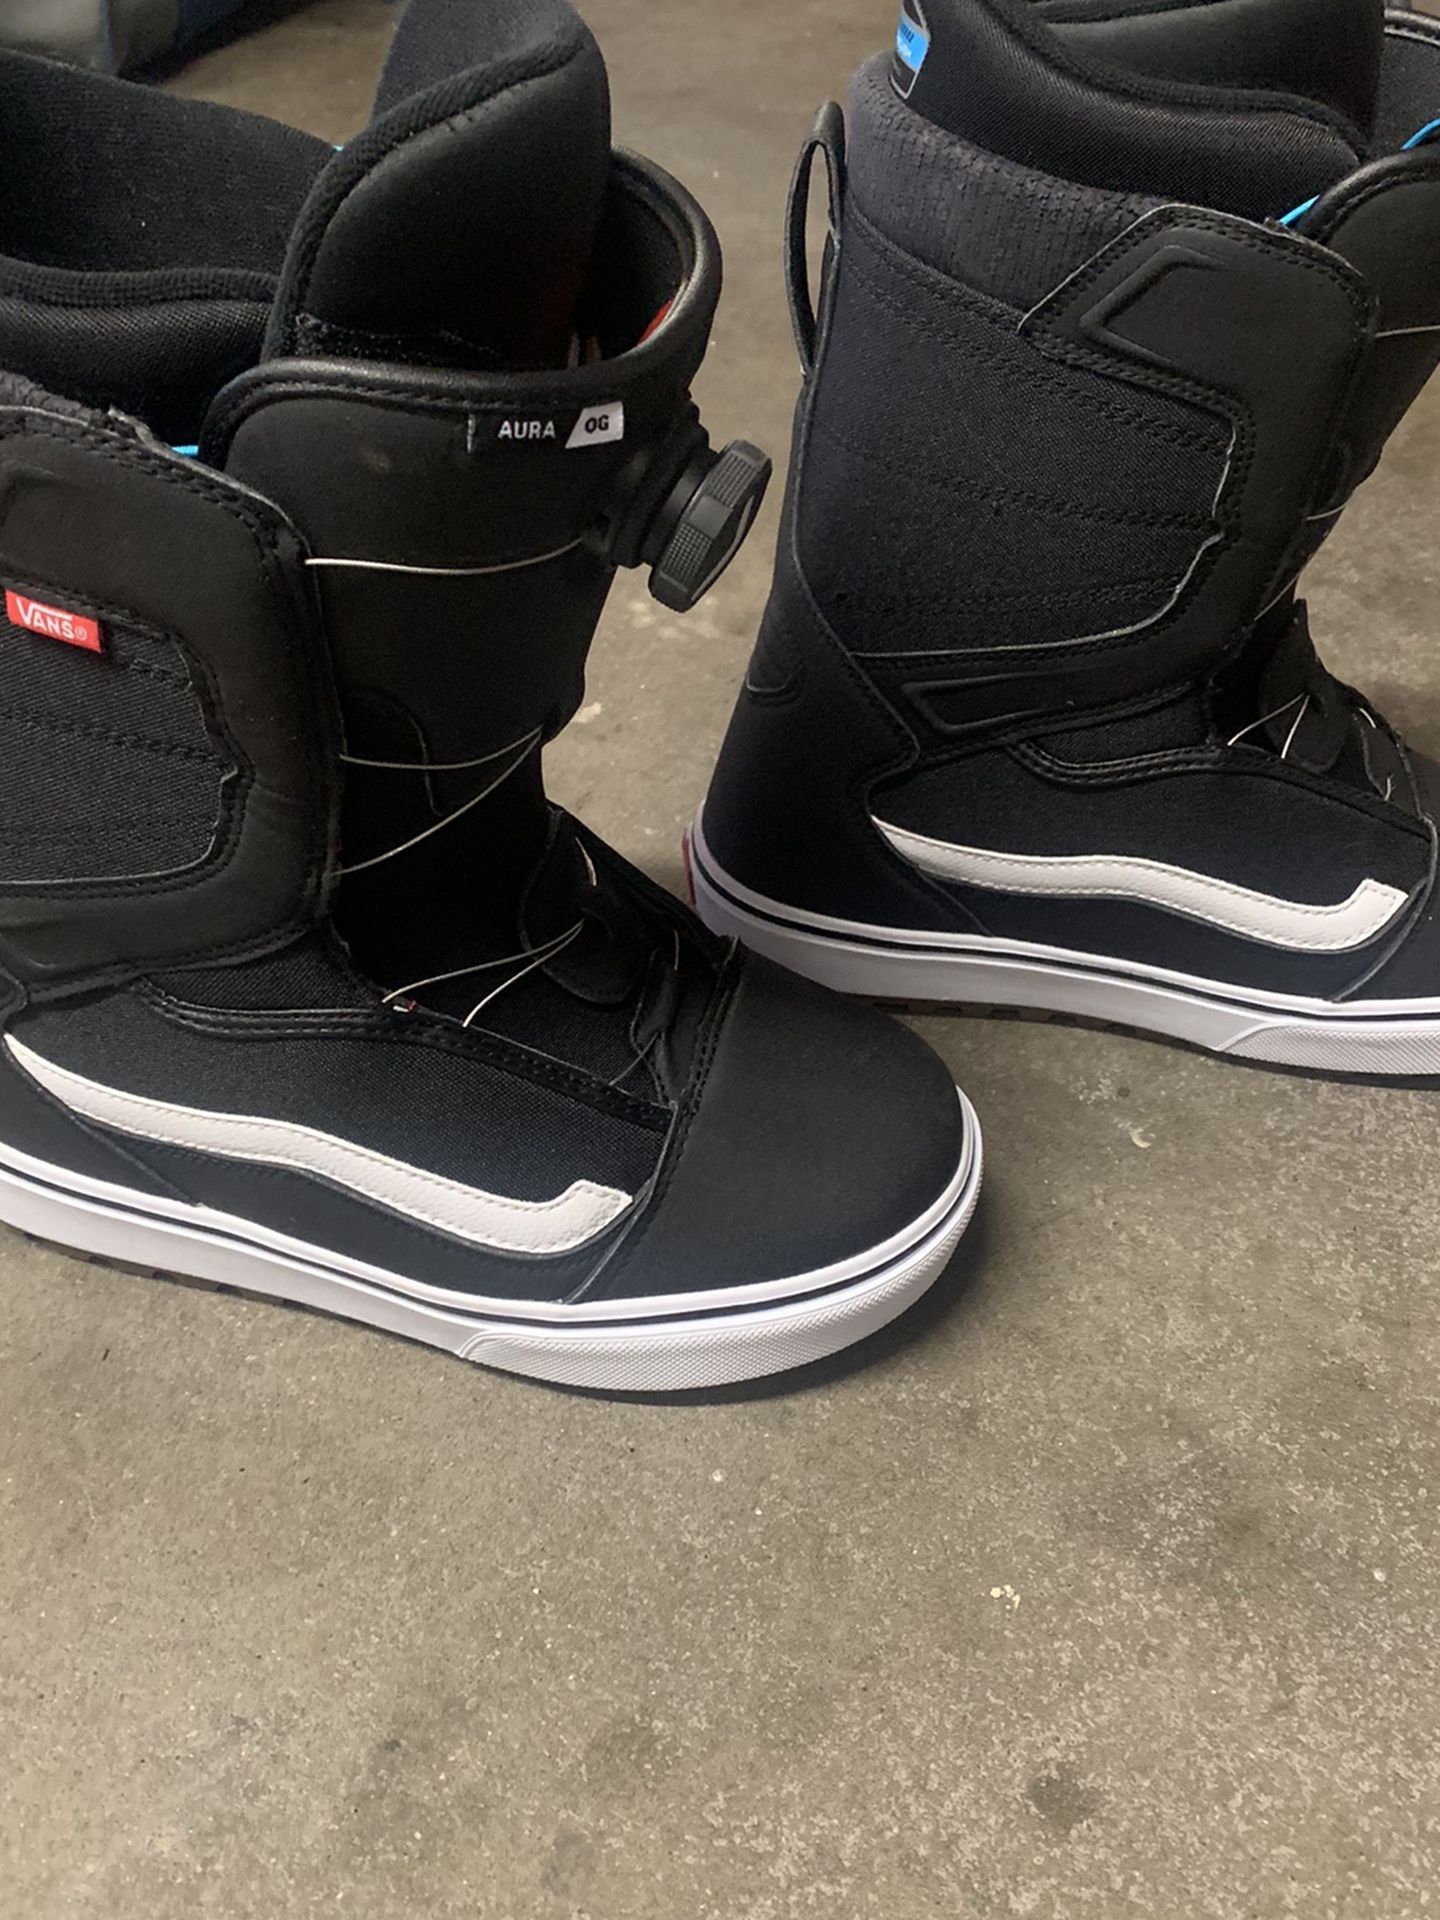 Vans Aura OG Snowboarding Boots. This Price Is Not Negotiable